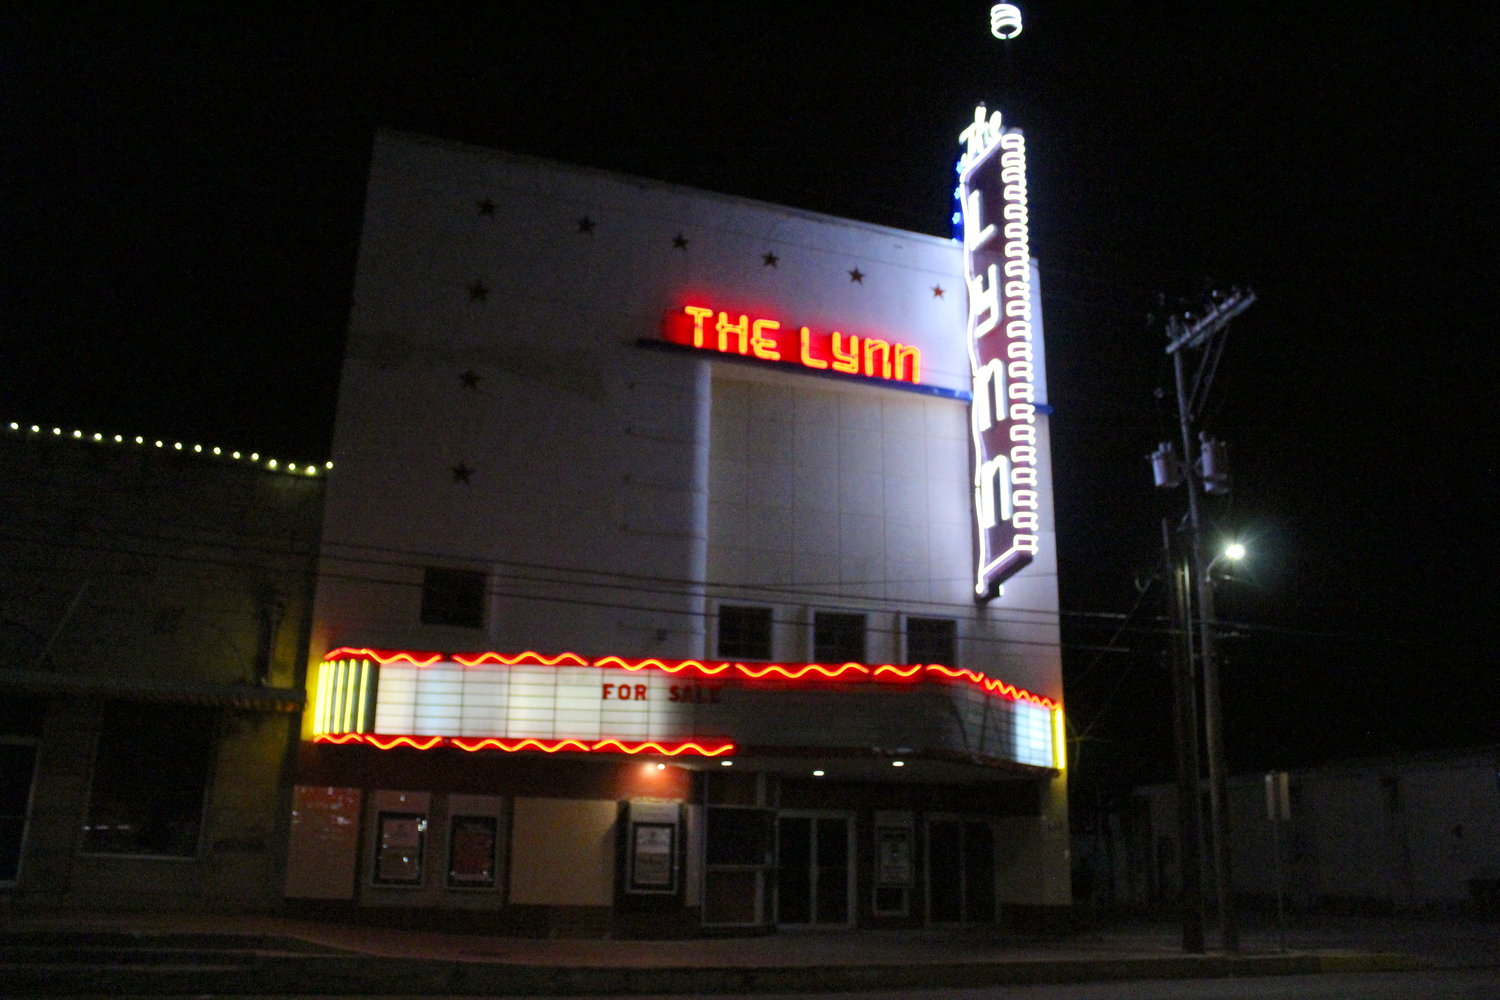 The Lynn Theatre was lit up Thursday, Jan. 19 for the one of the first times since its closure.